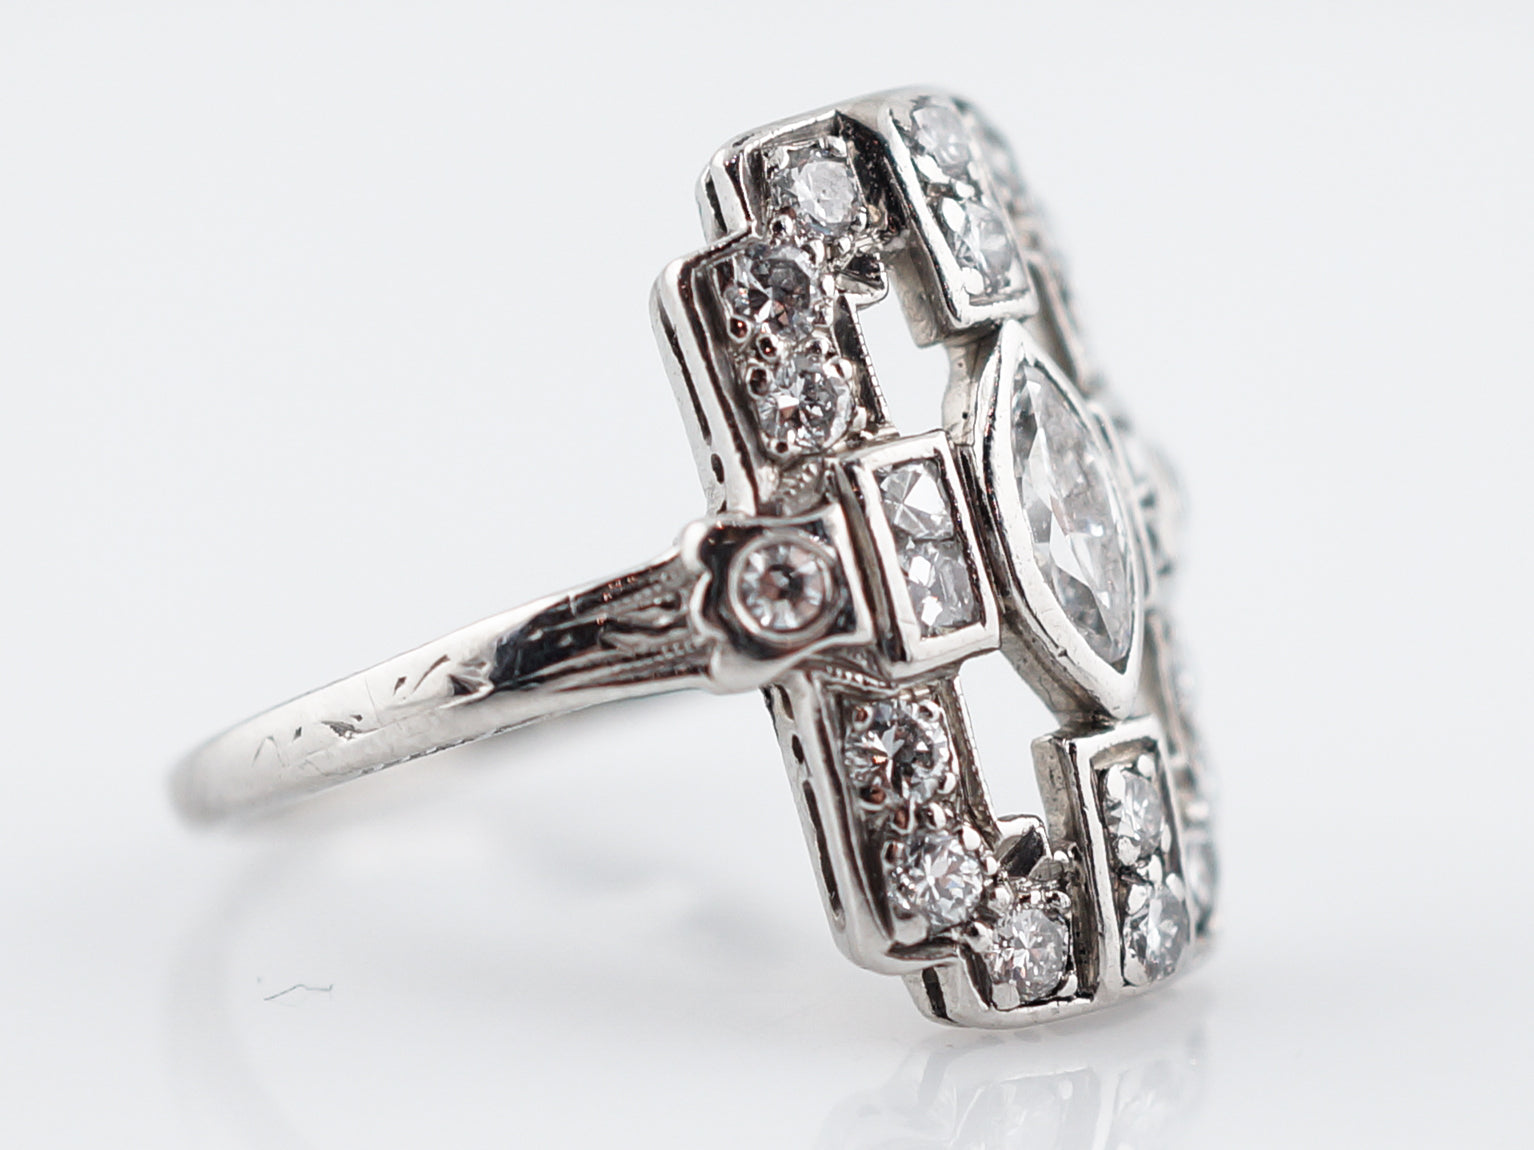 Antique Right Hand Ring Edwardian .61 Old Cut Diamonds in PlatinumComposition: Platinum Total Diamond Weight: .61ct Total Gram Weight: 4.30 g